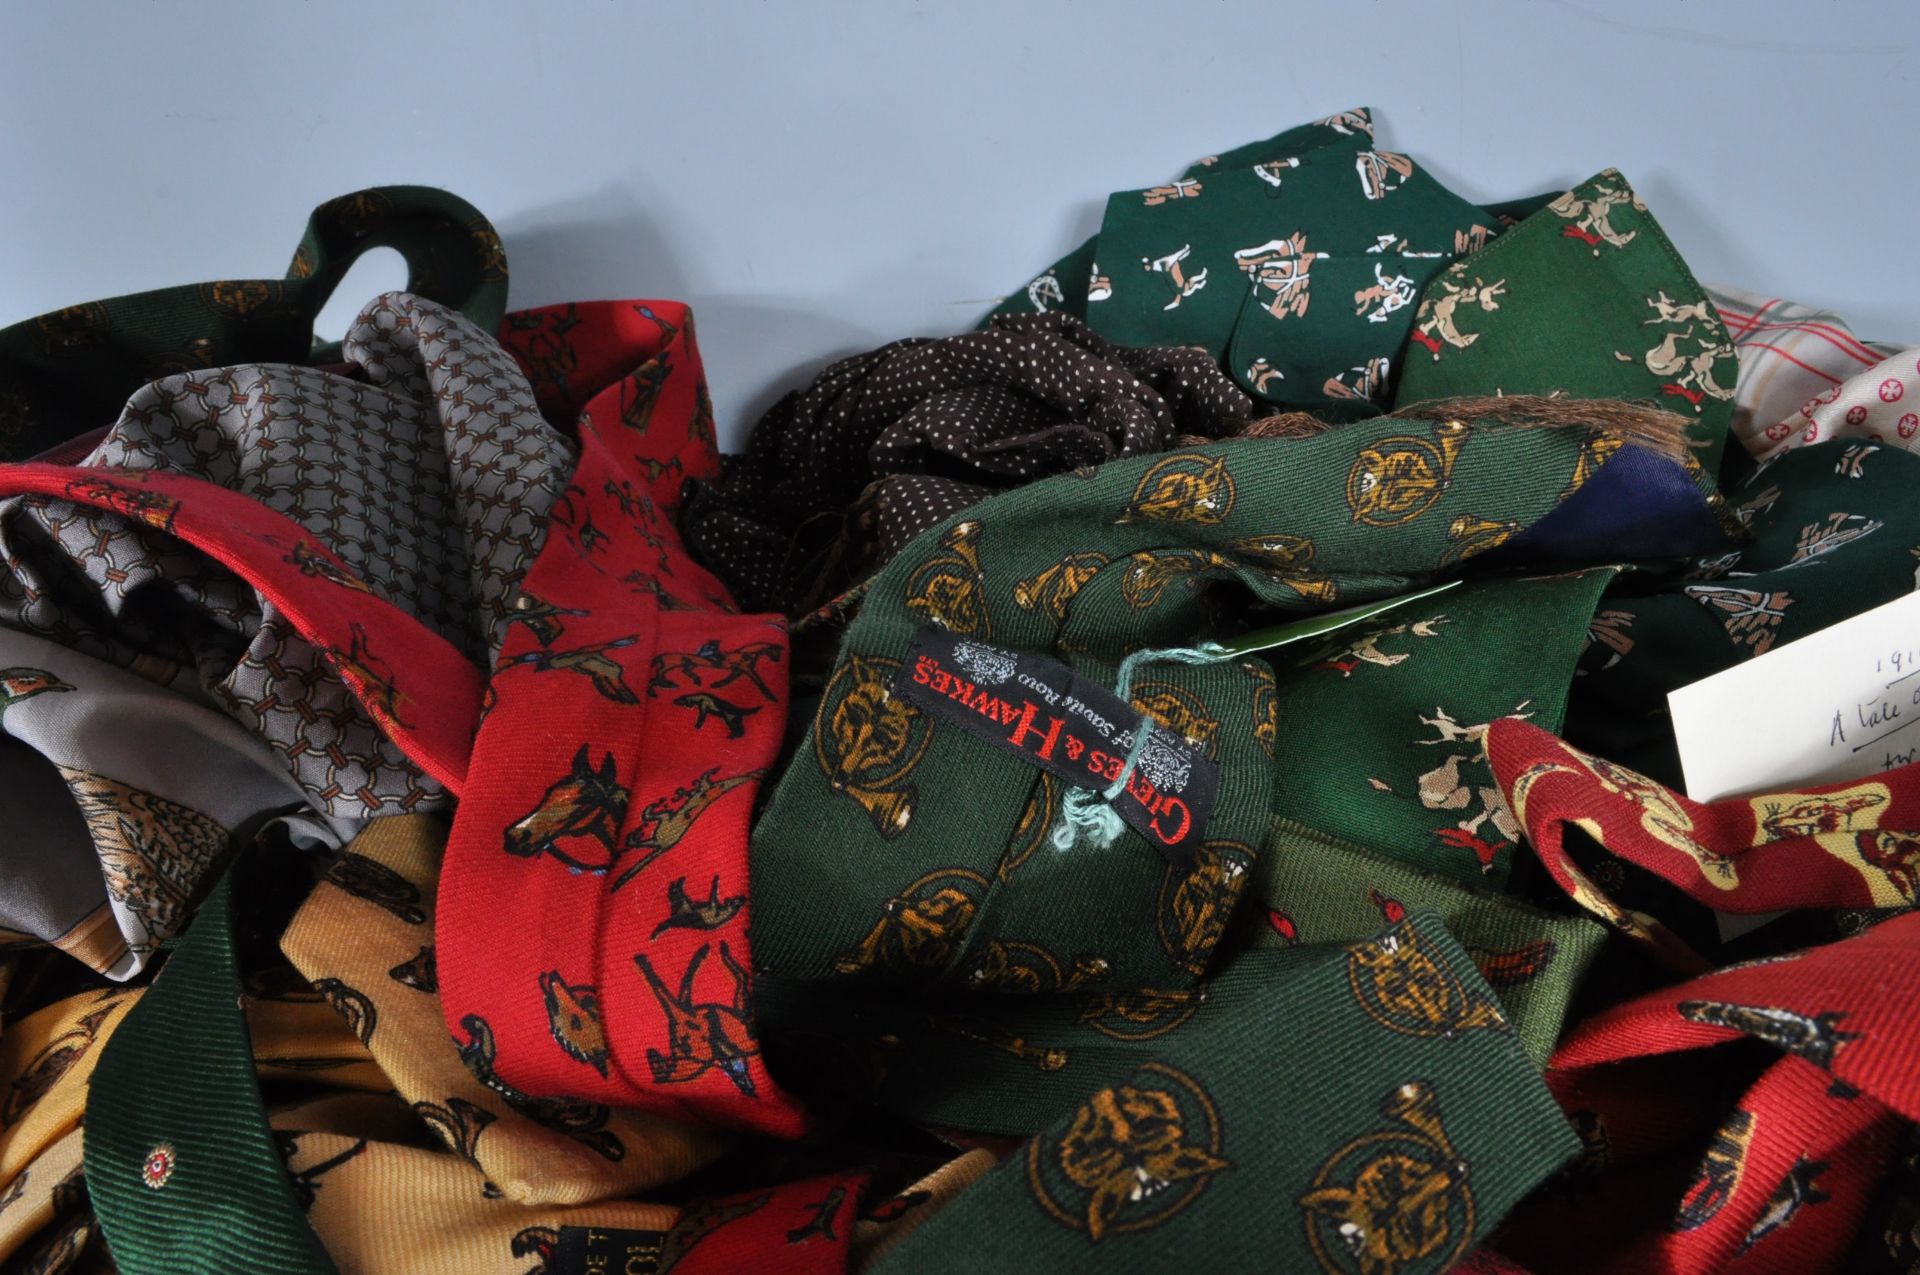 COLLECTION OF VINTAGE 1950S MENS TIES SCARVES AND CRAVATS INCLUDING SEVERAL TOOTAL EXAMPLES. - Image 8 of 8